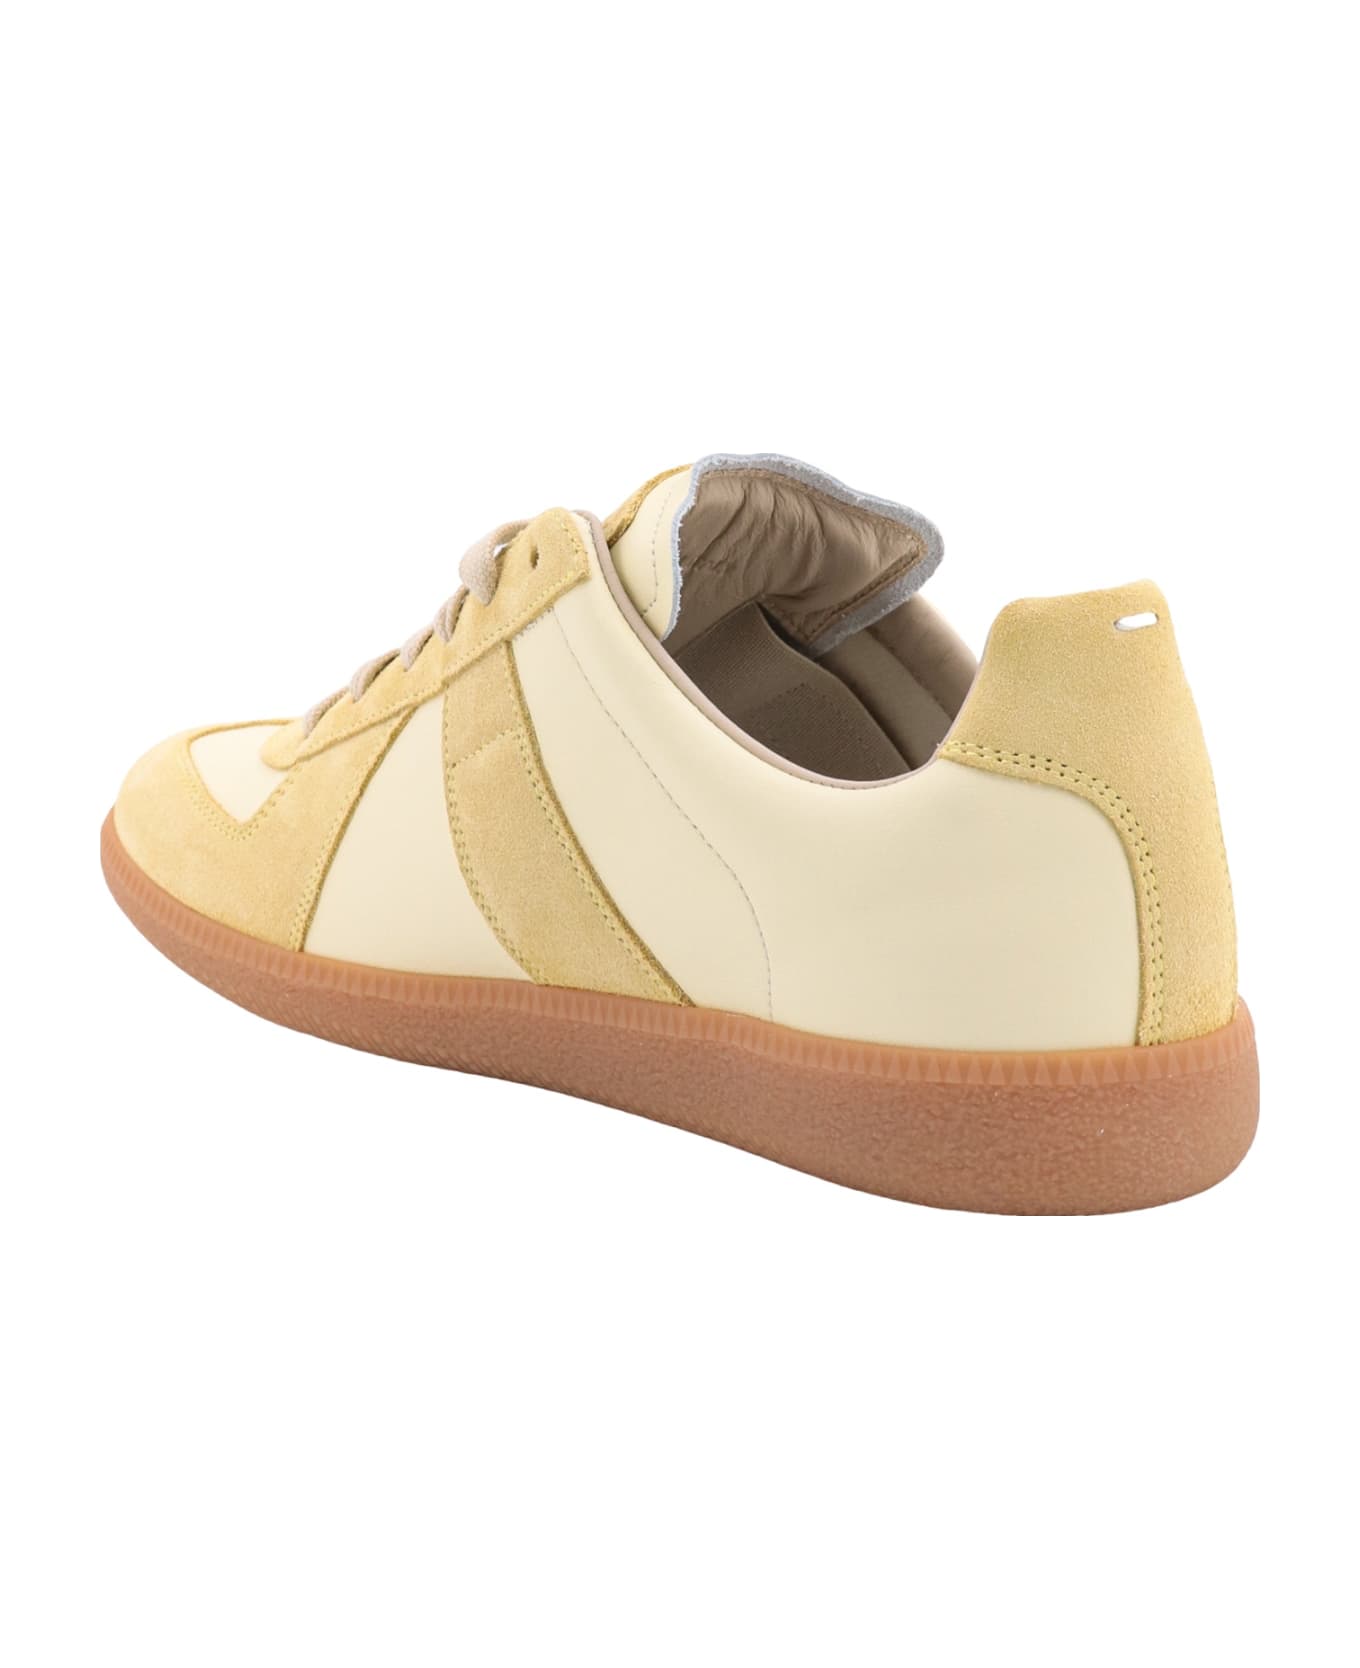 Maison Margiela Replica Leather Sneakers - Yellow スニーカー